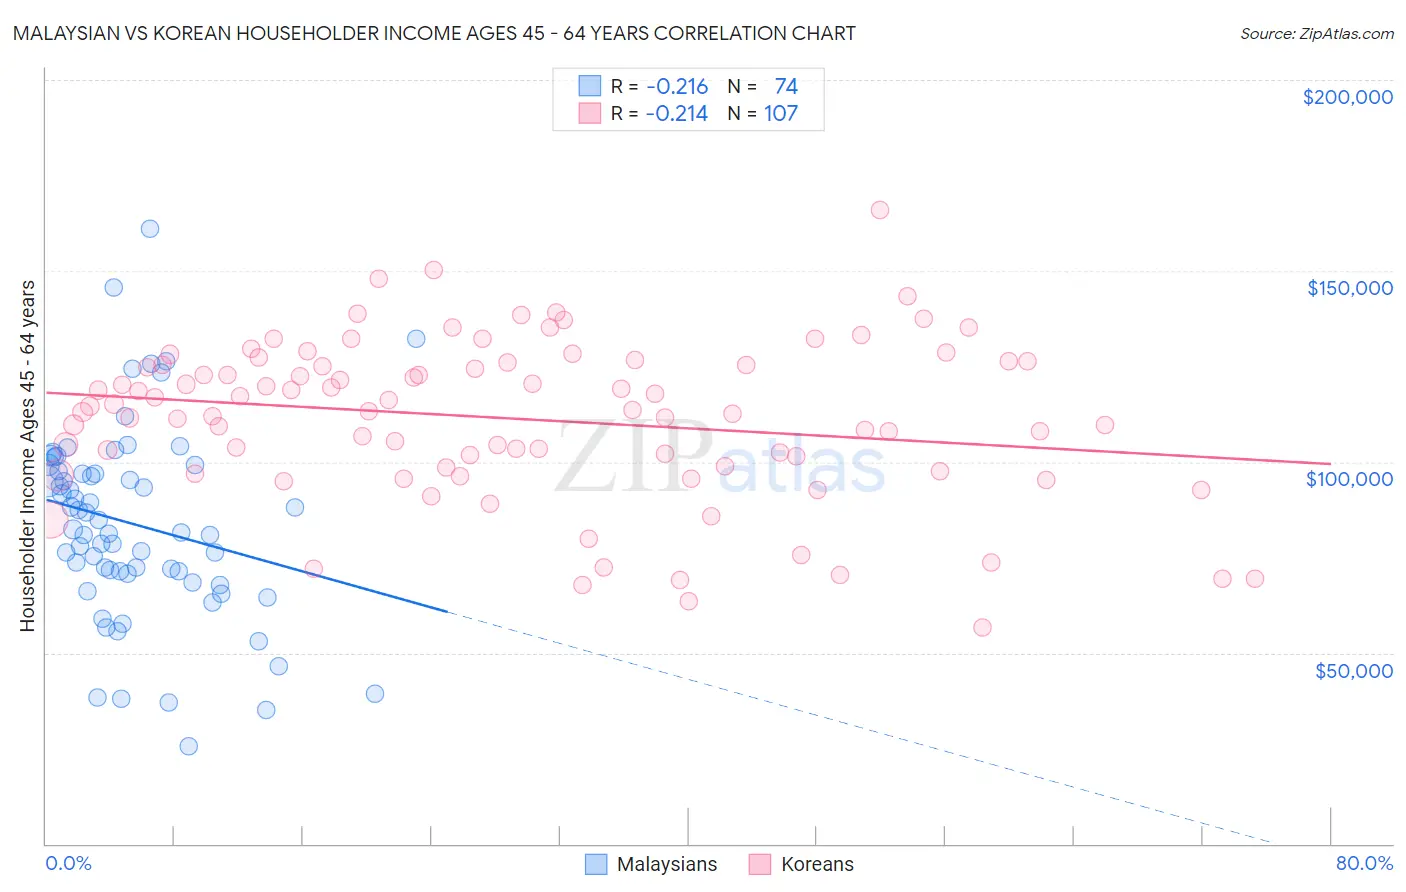 Malaysian vs Korean Householder Income Ages 45 - 64 years